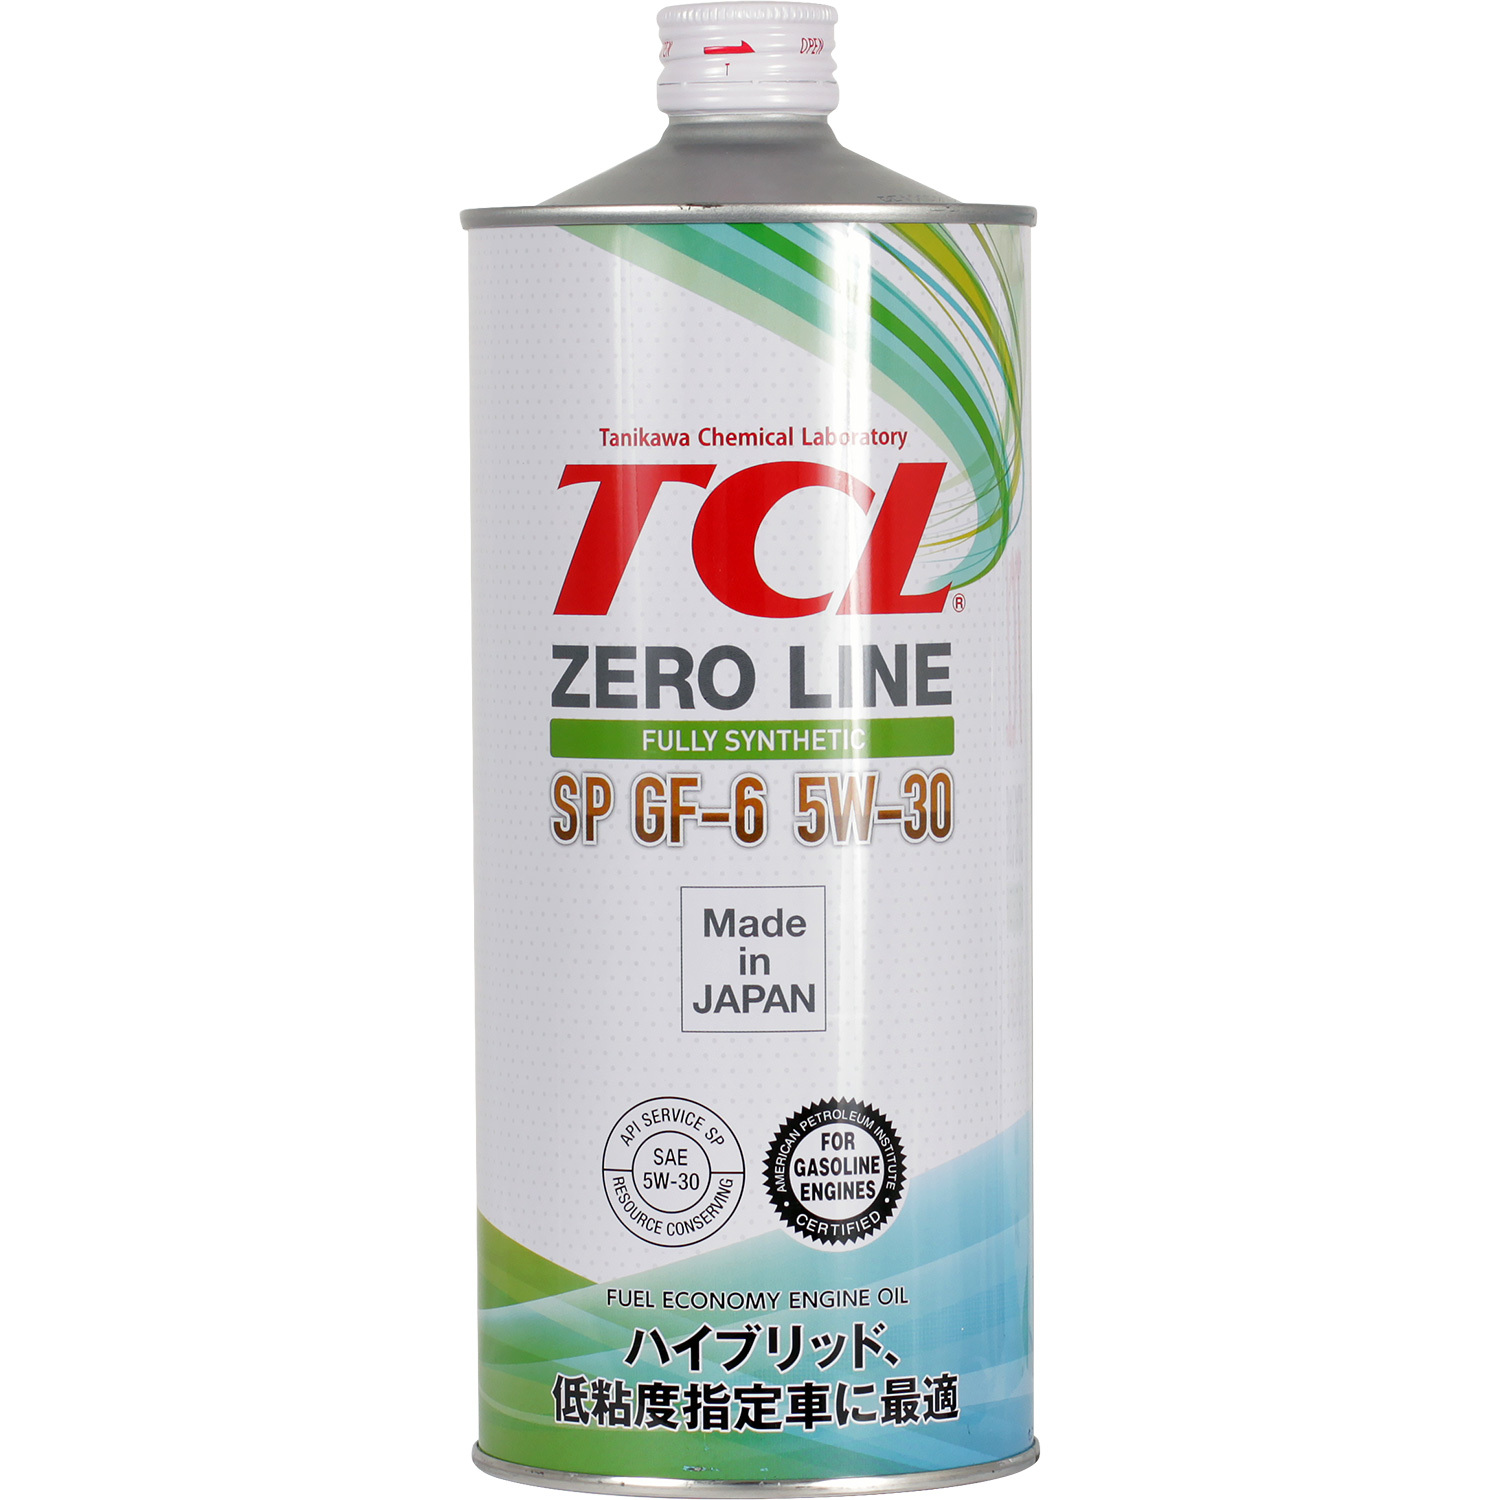 Масло tcl 5w 30. Моторное масло TCL 0w20. TCL масло моторное 0w-20 4л. Масло моторное TCL Zero line 5w30 допуски ?. Характеристика масла TCL.